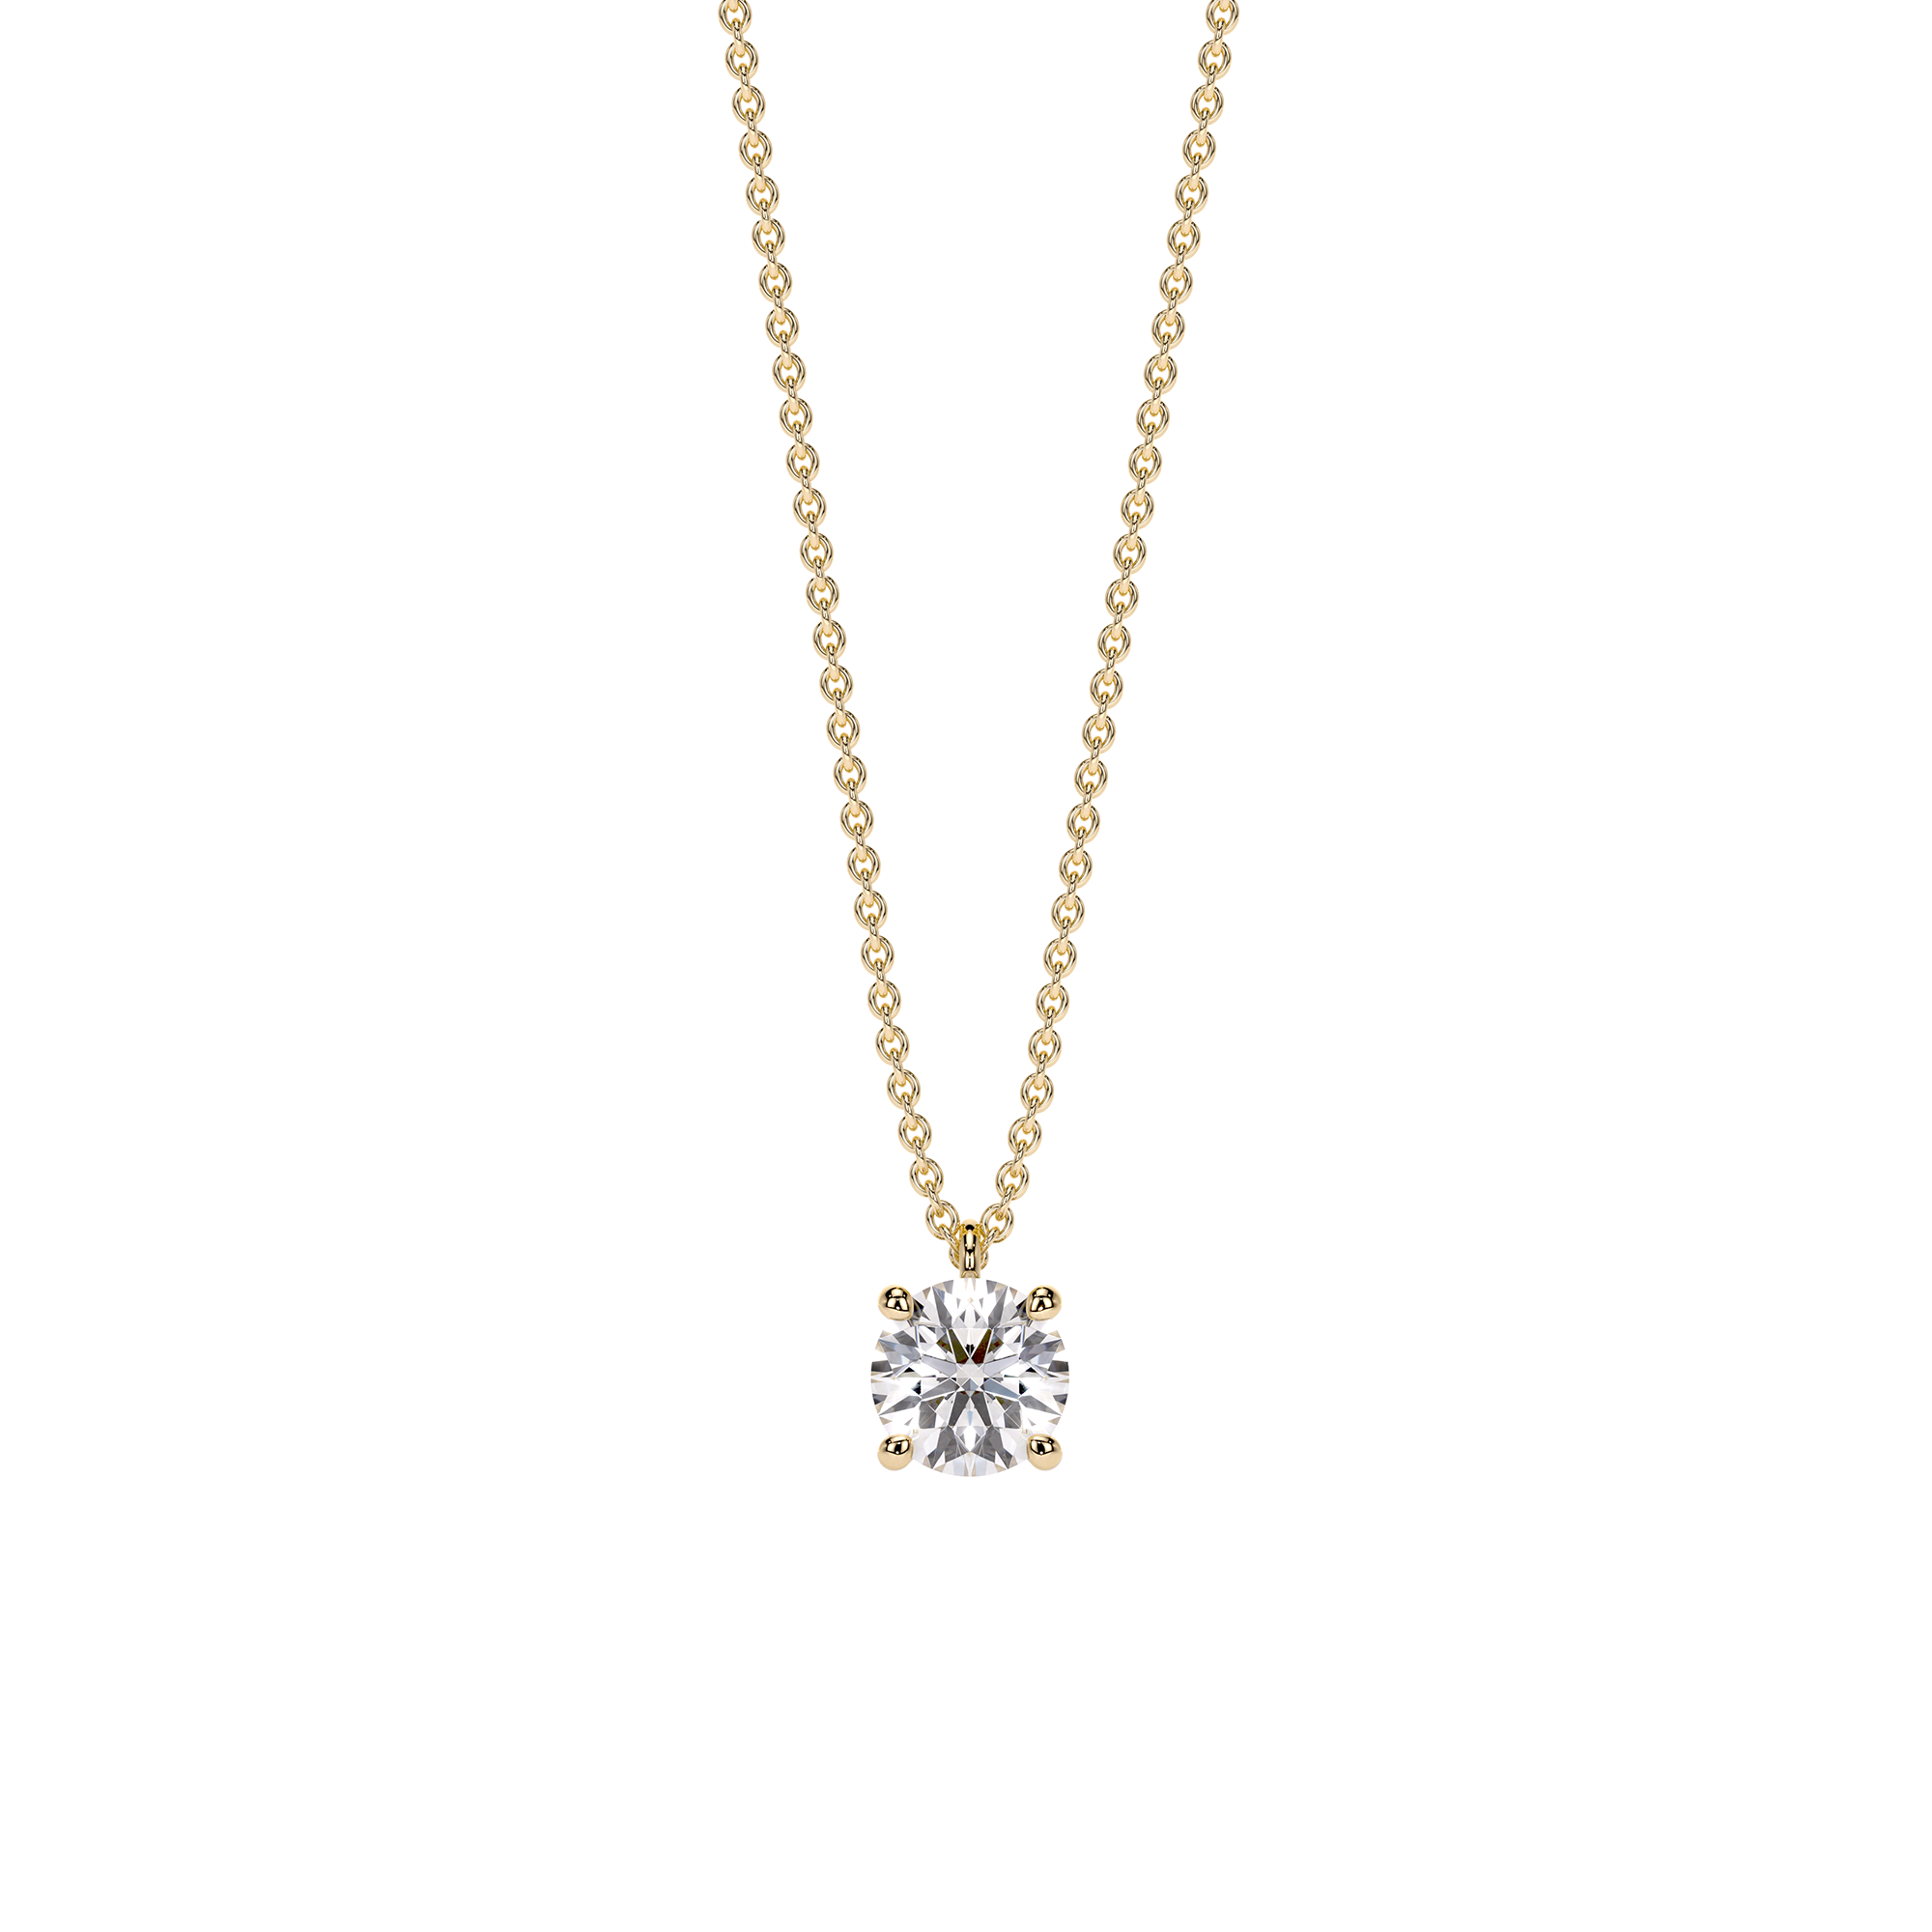 14 k yellow gold Solitaire necklace, with 1 white 1.00 ct diamond